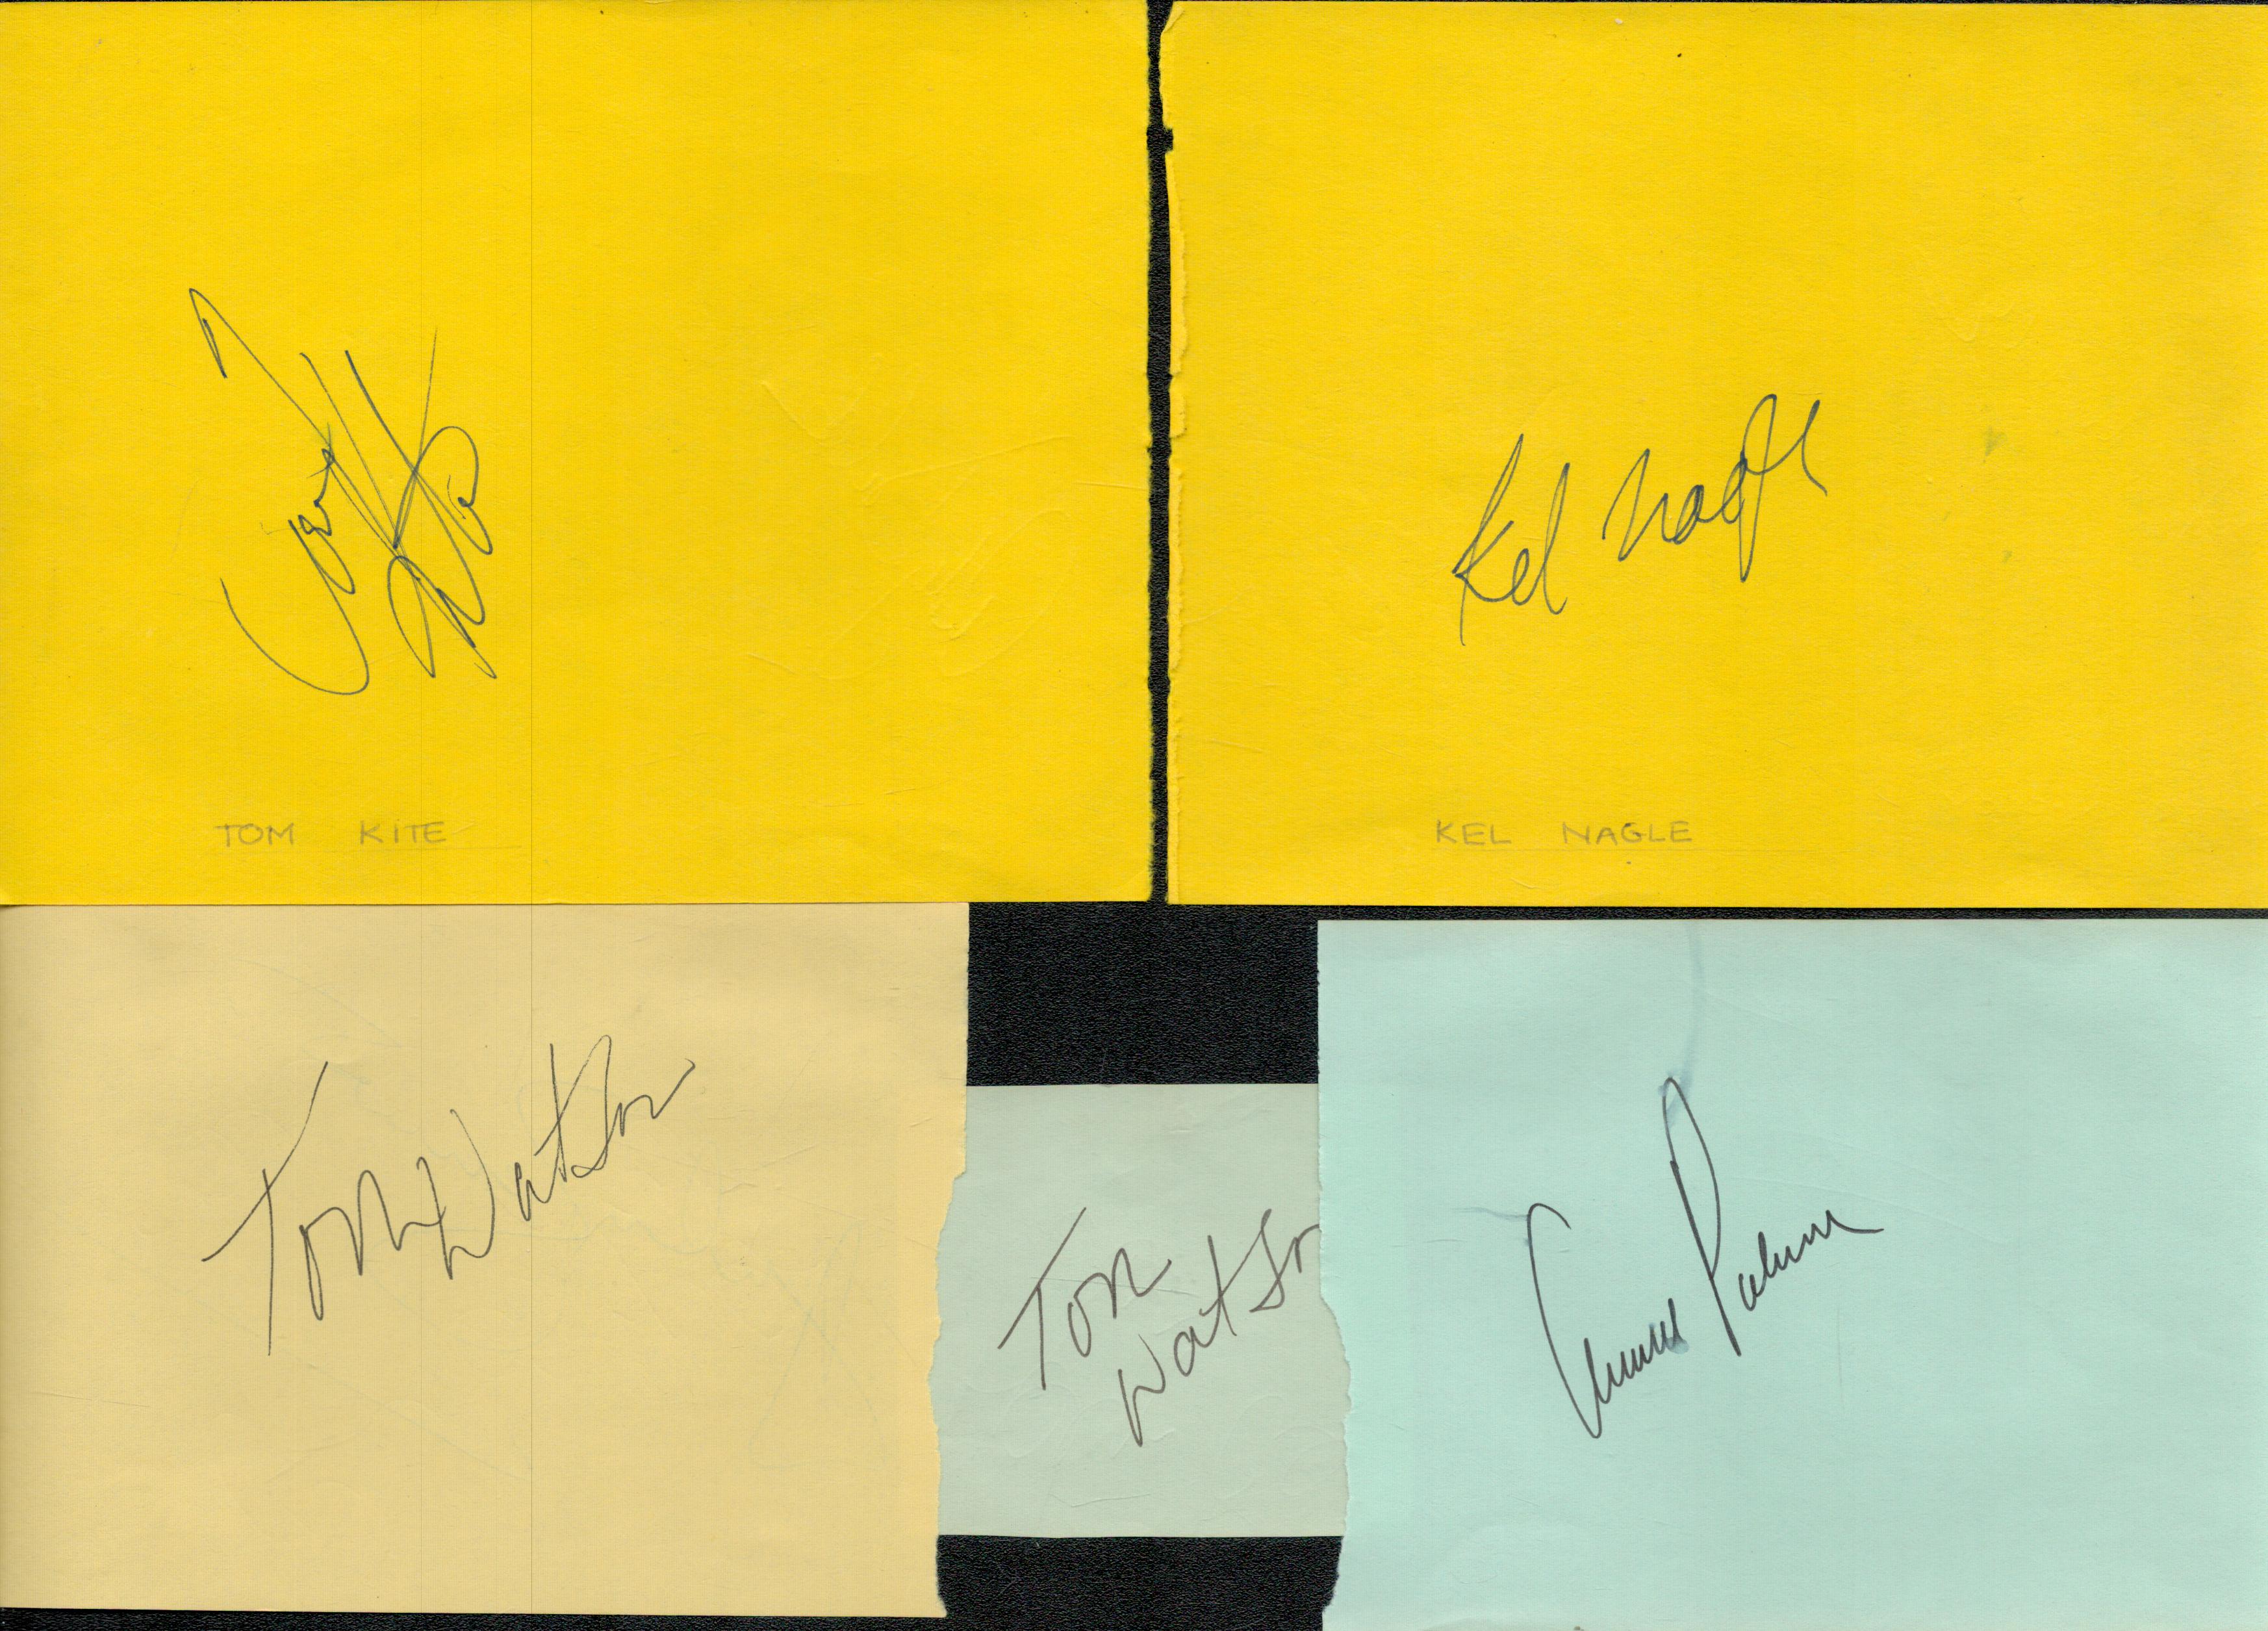 Golf signed album pages. Includes Tom Watson, Arnold Palmer, Ken Nagle, Peter Mccloy and Tom Kite.